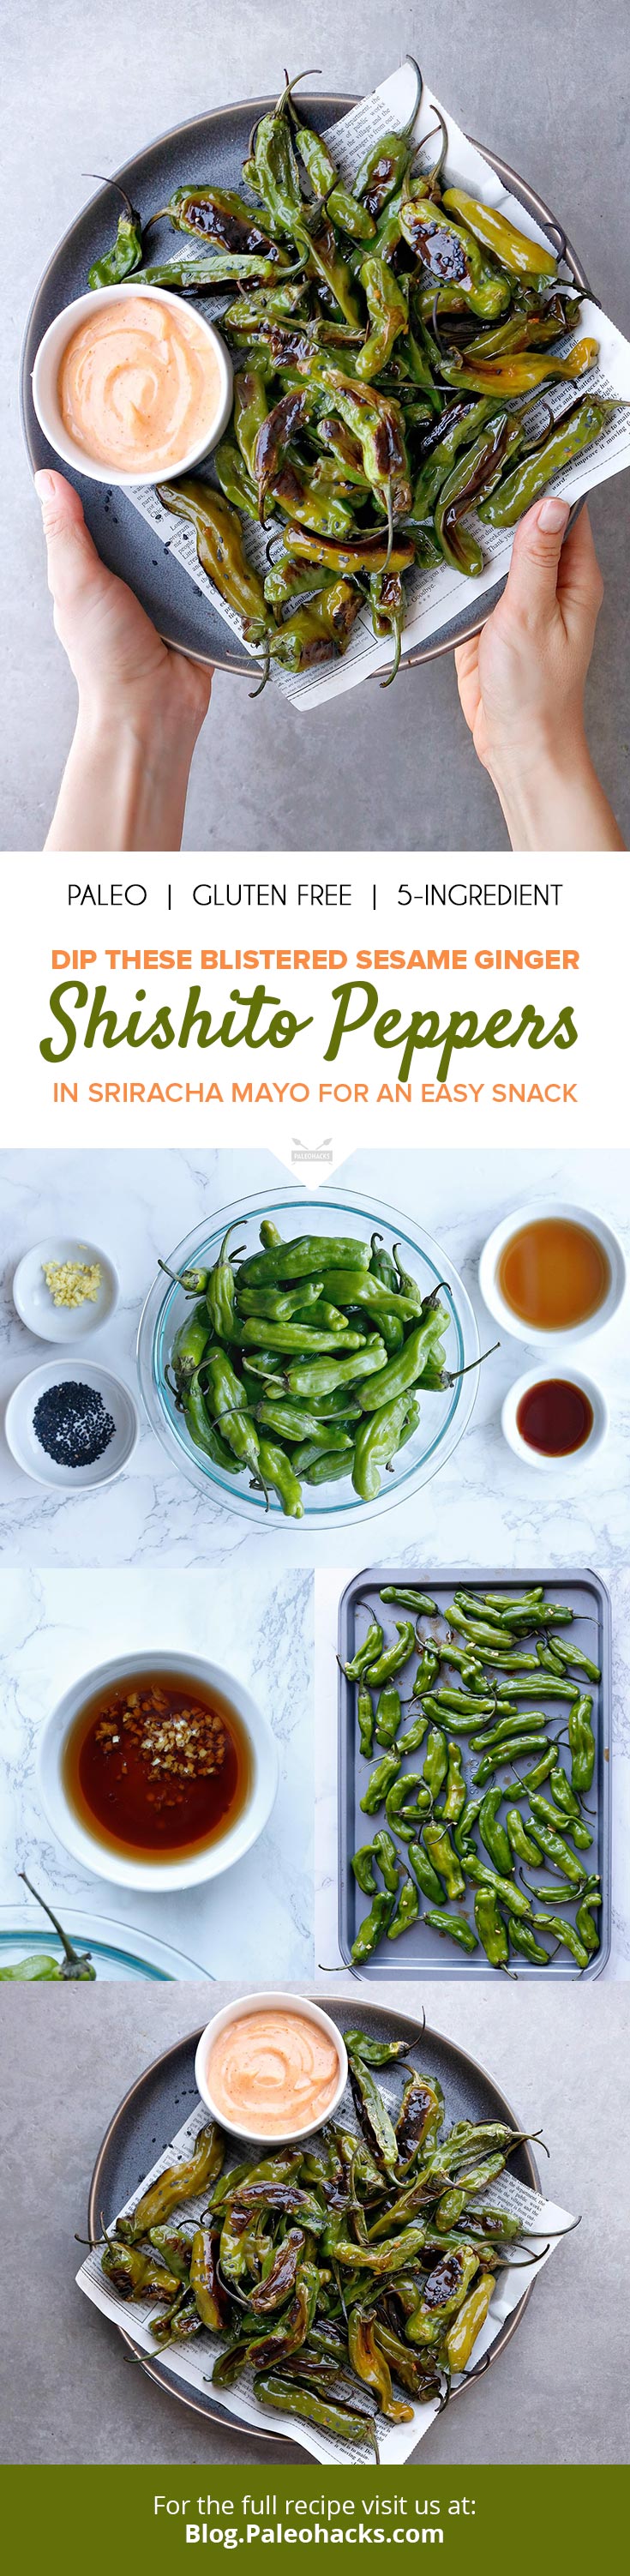 To bring out the flavor of the Shishito peppers, this easy recipe tosses them in a sweet and salty sauce made from toasted sesame seed oil, coconut aminos and fresh ginger.